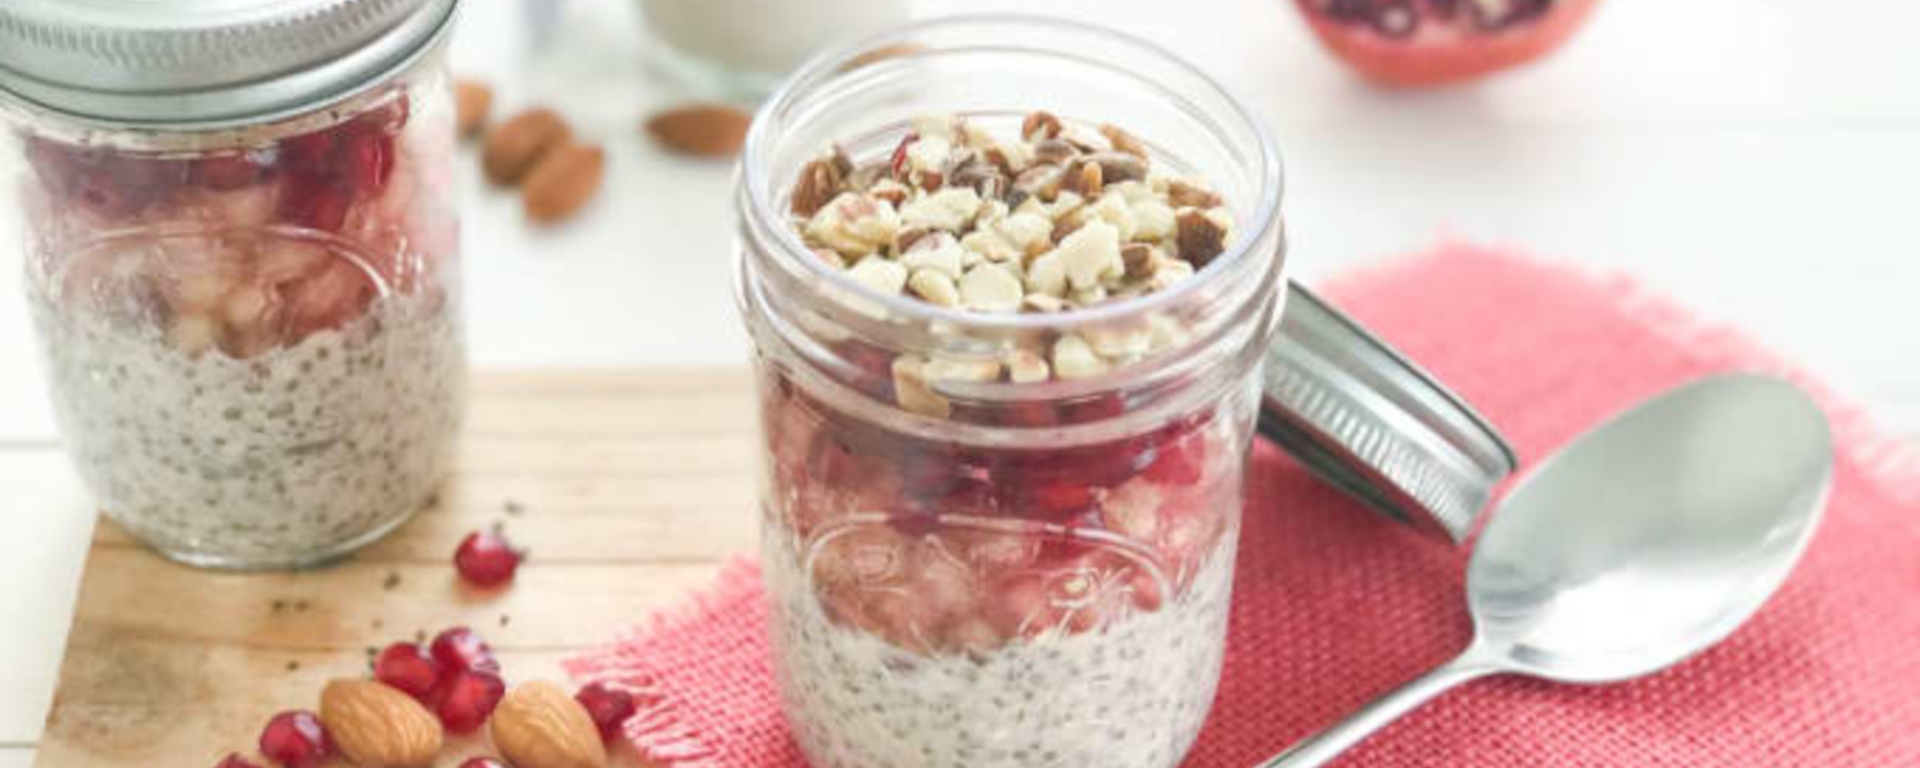 Overnight Oats with Pomegranate and Roasted Almonds